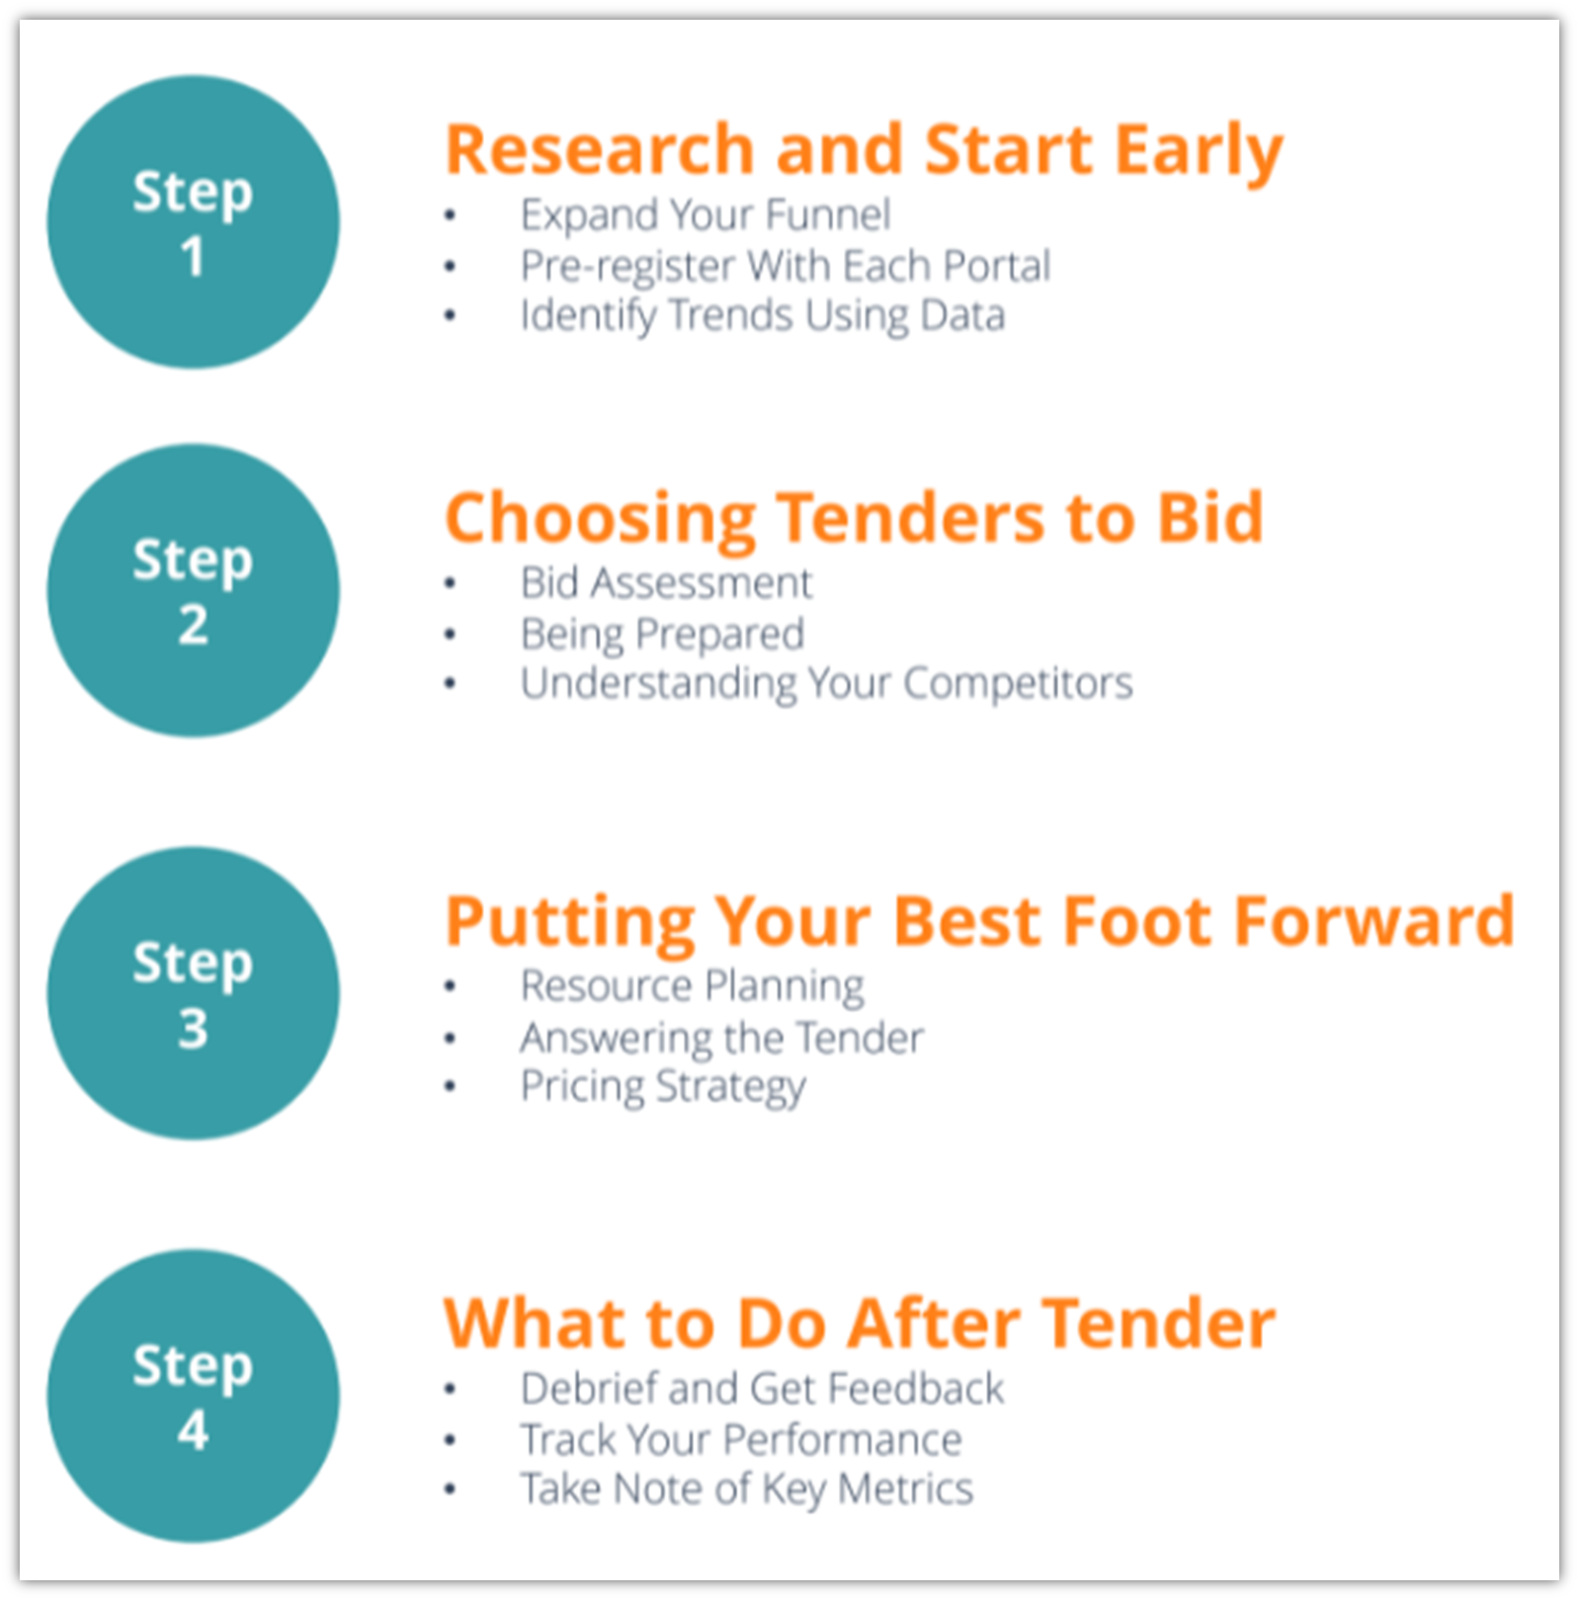 There are four main steps to take to prepare for the tendering process.